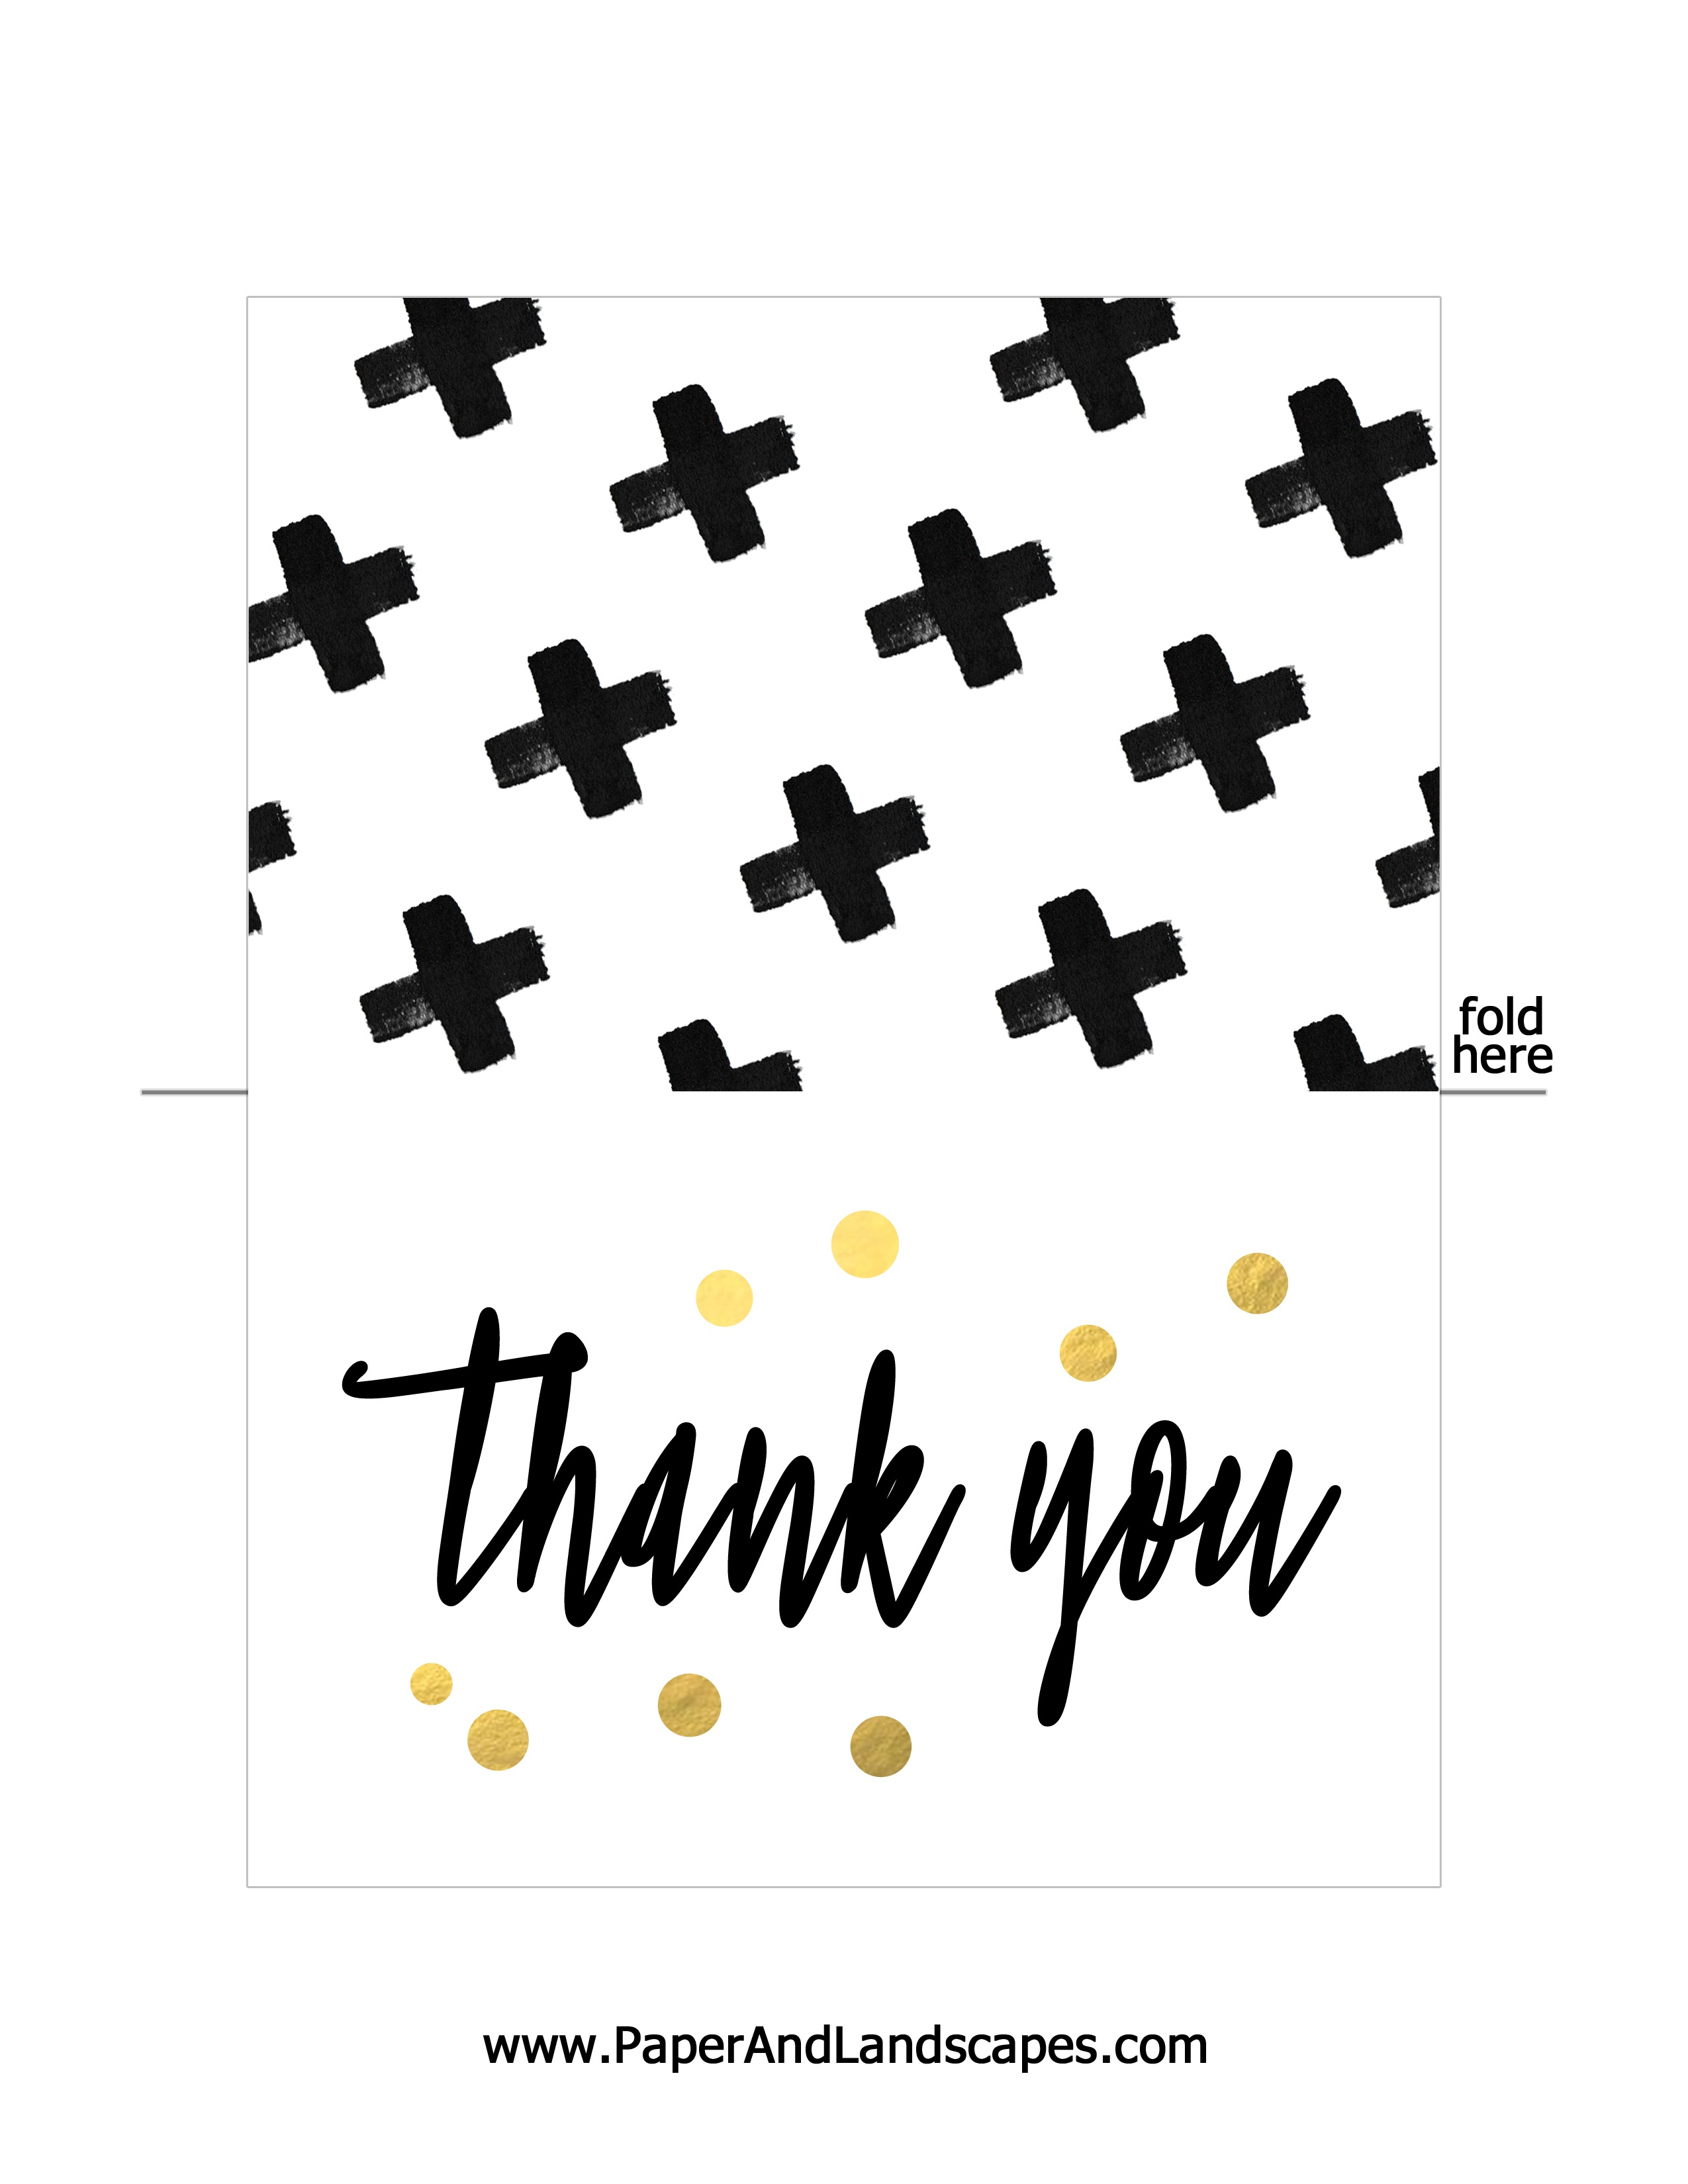 Free Printable Thank You Cards - Paper And Landscapes - Free Printable Custom Thank You Cards